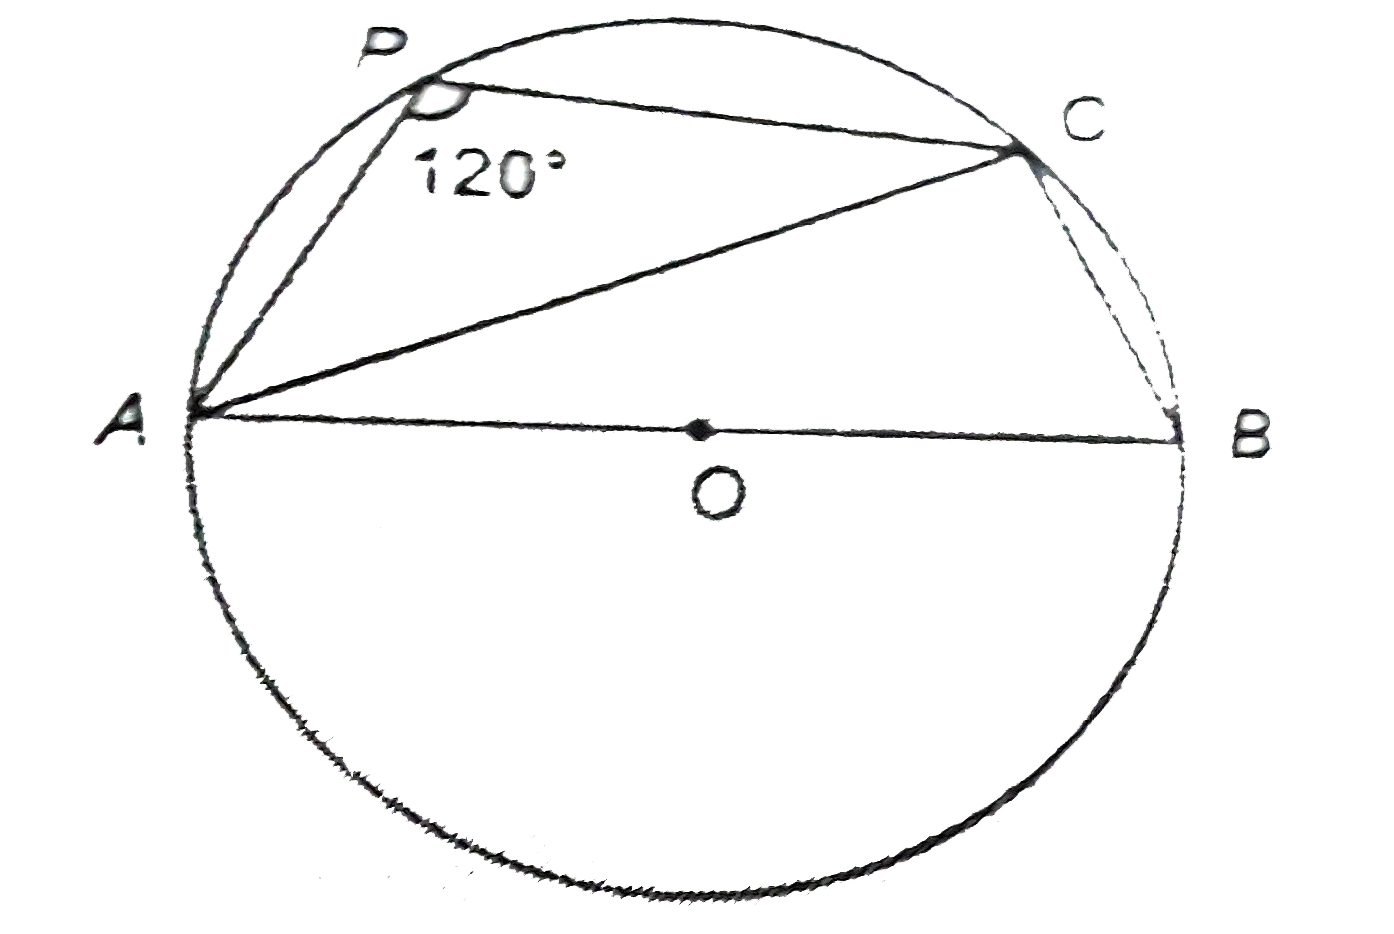 In the adjoining figure, ABCD is a cyclic quadrilateral and AB is the diameter of the circle. If angleAPC=120^@, then find the value of angle CAB.